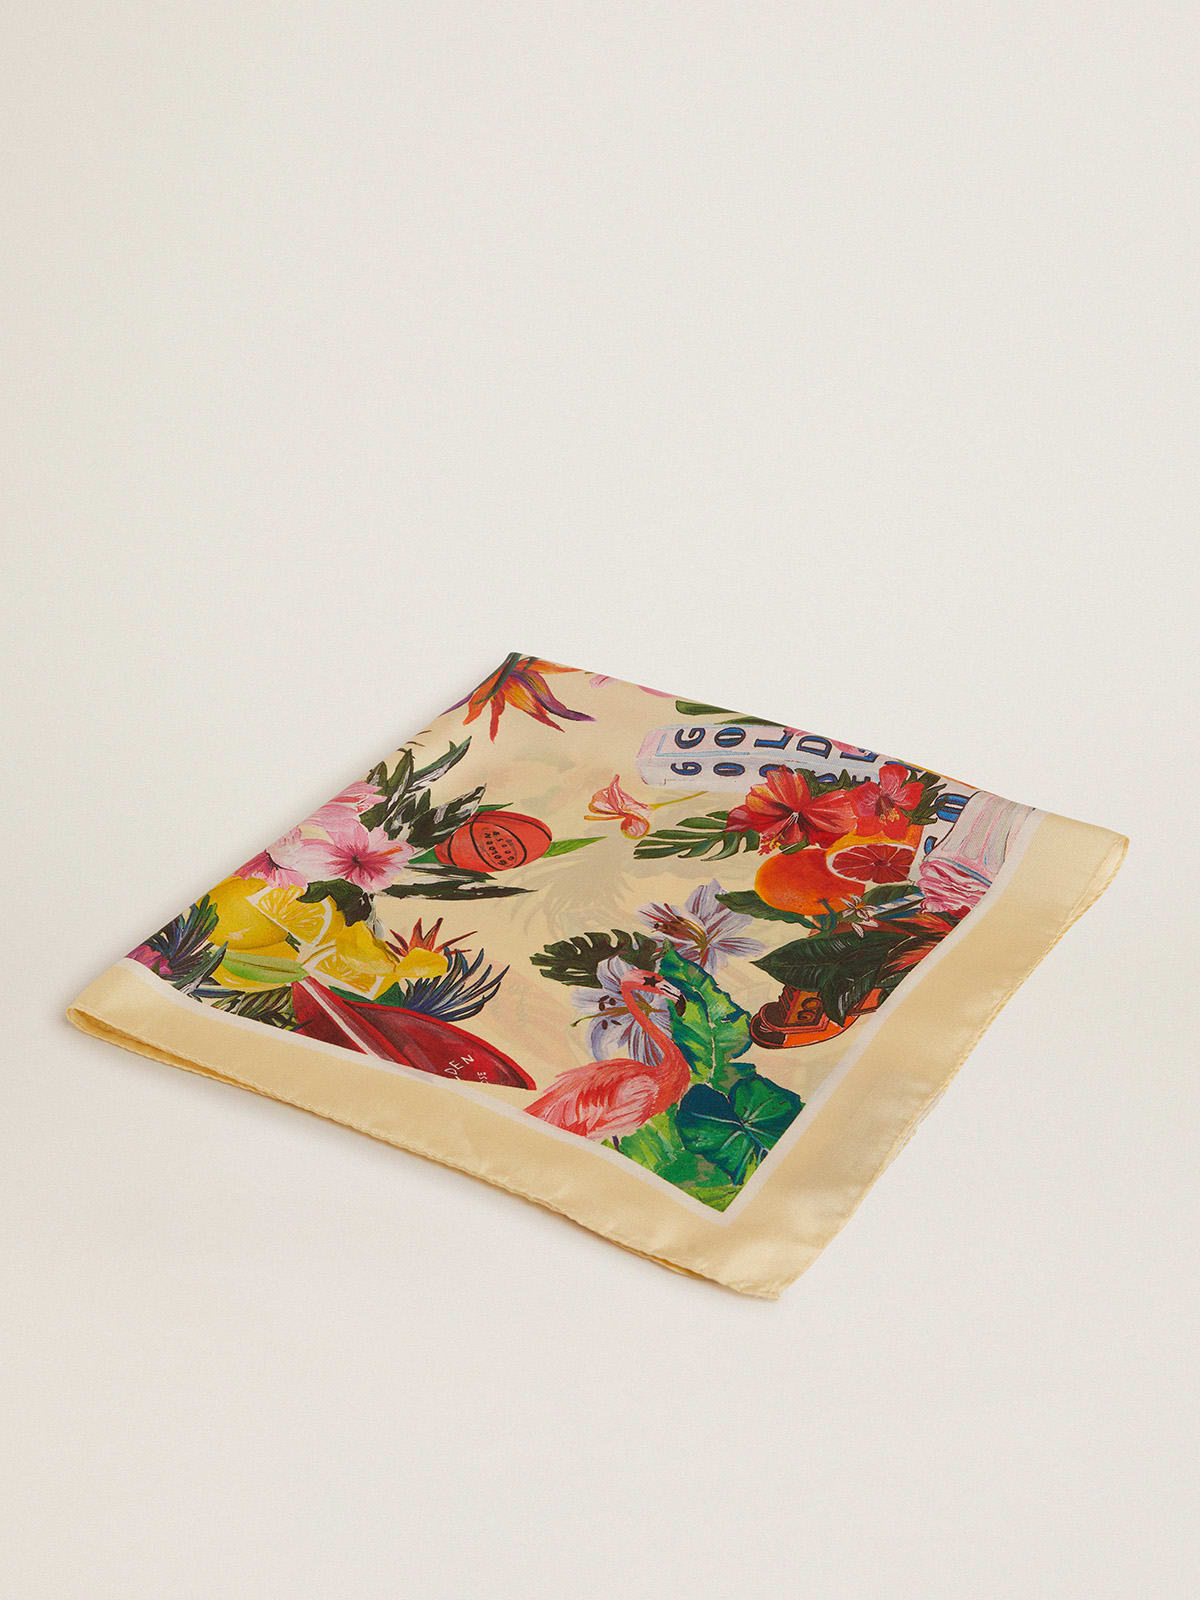 Lemonade-colored silk scarf with multicolored tropical print